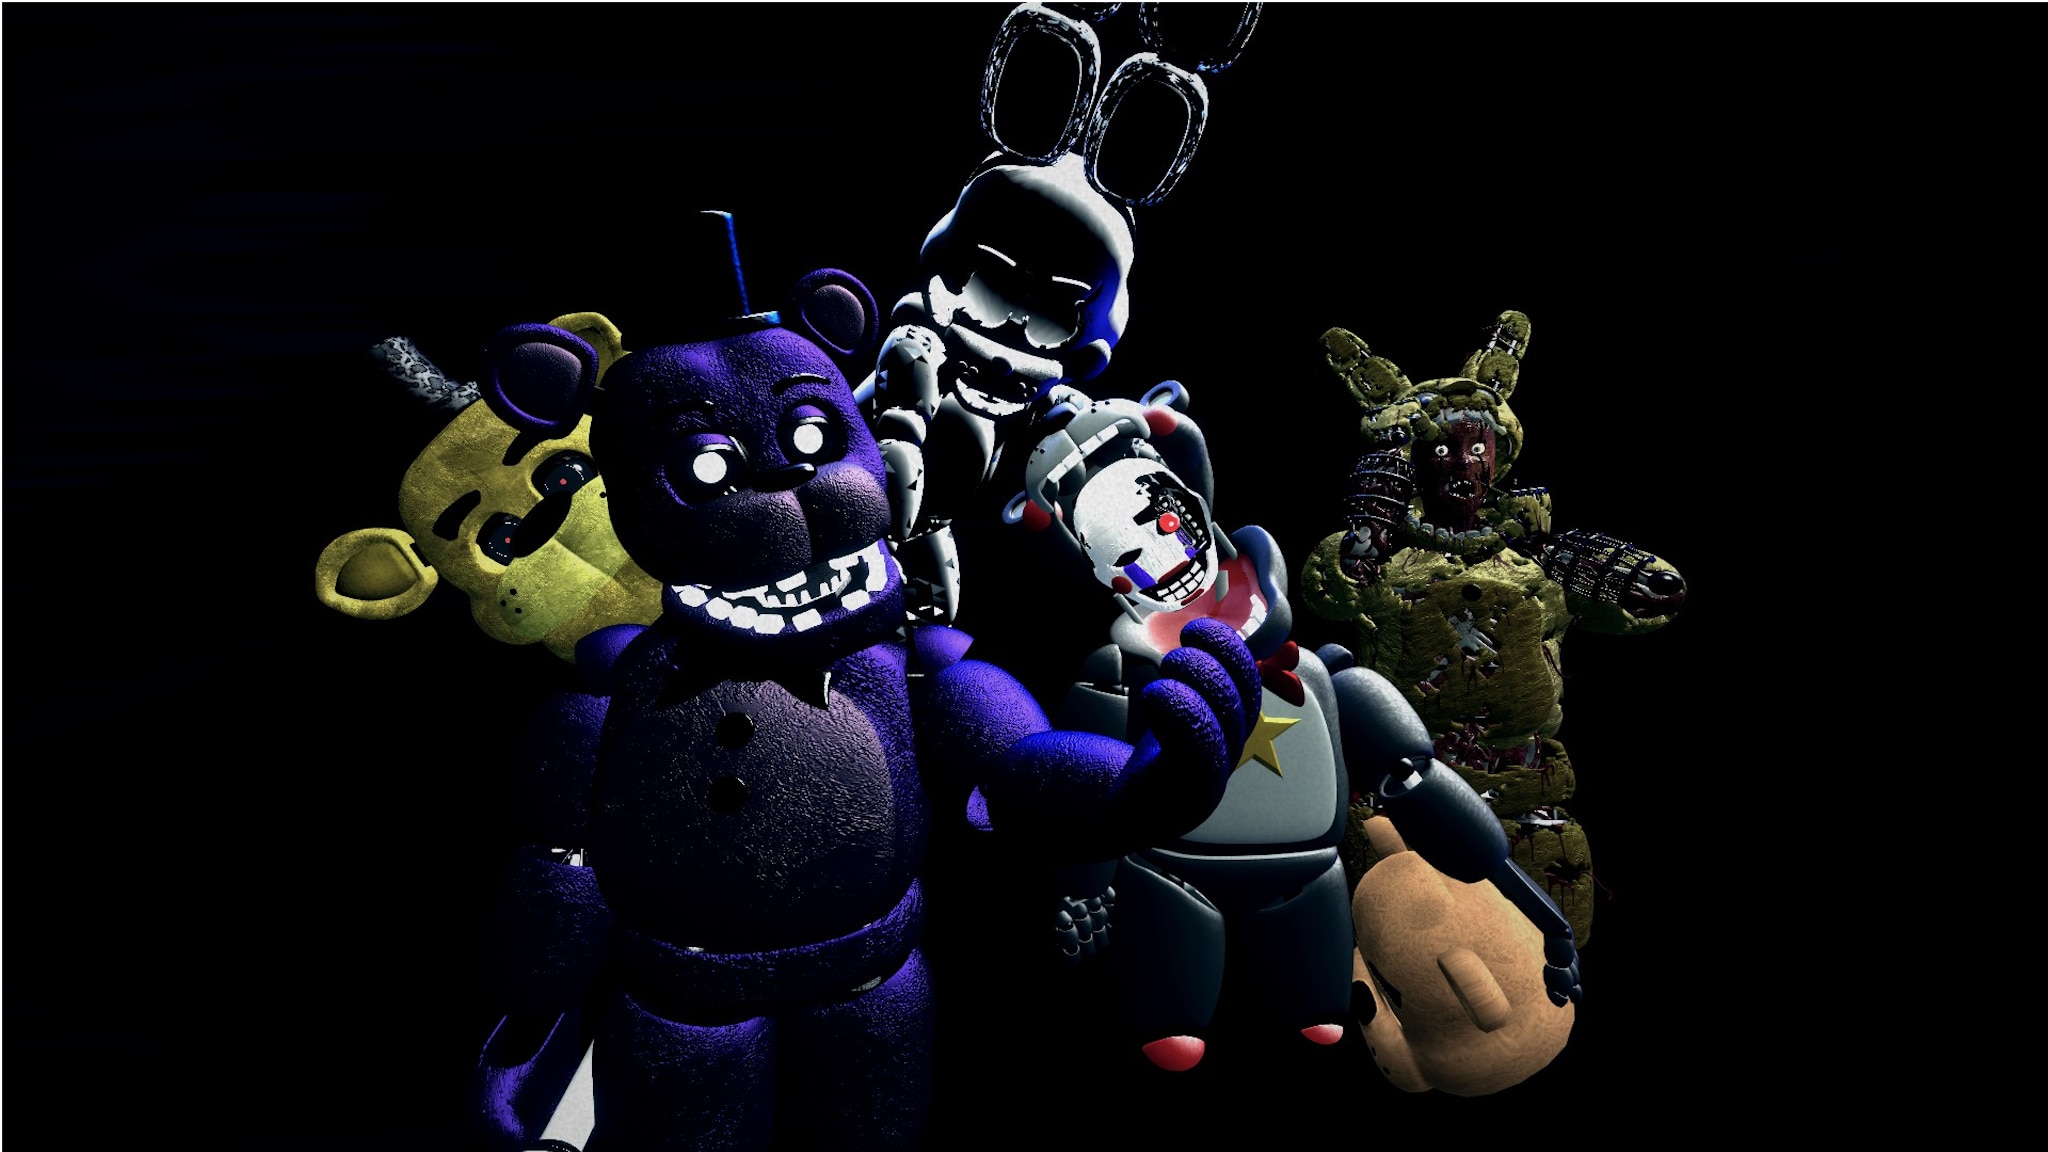 The Withered Animatronics Voice lines Fnaf 2 - BiliBili